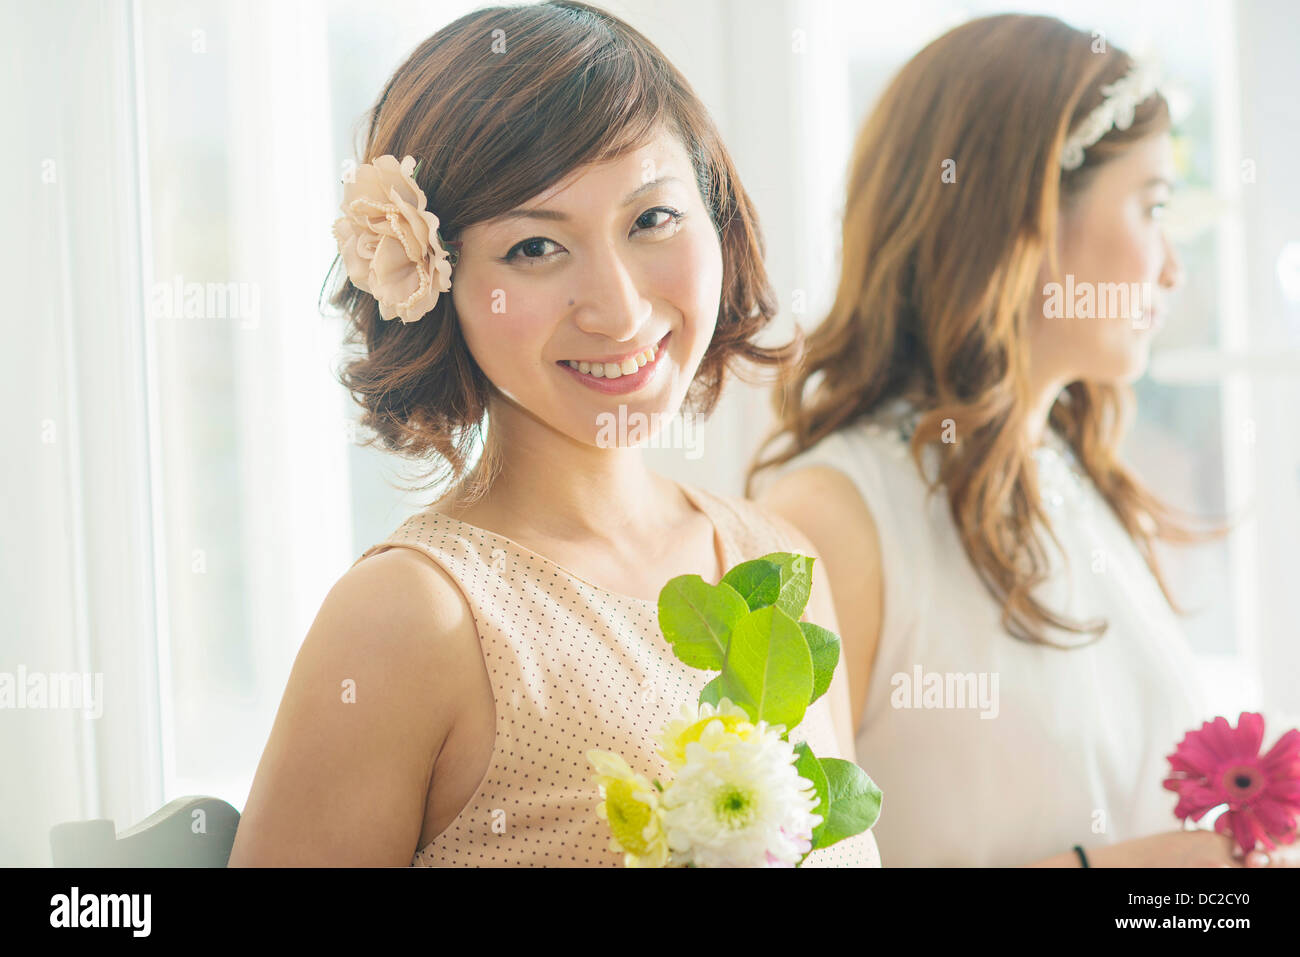 Smiling woman with flower looking at camera Stock Photo